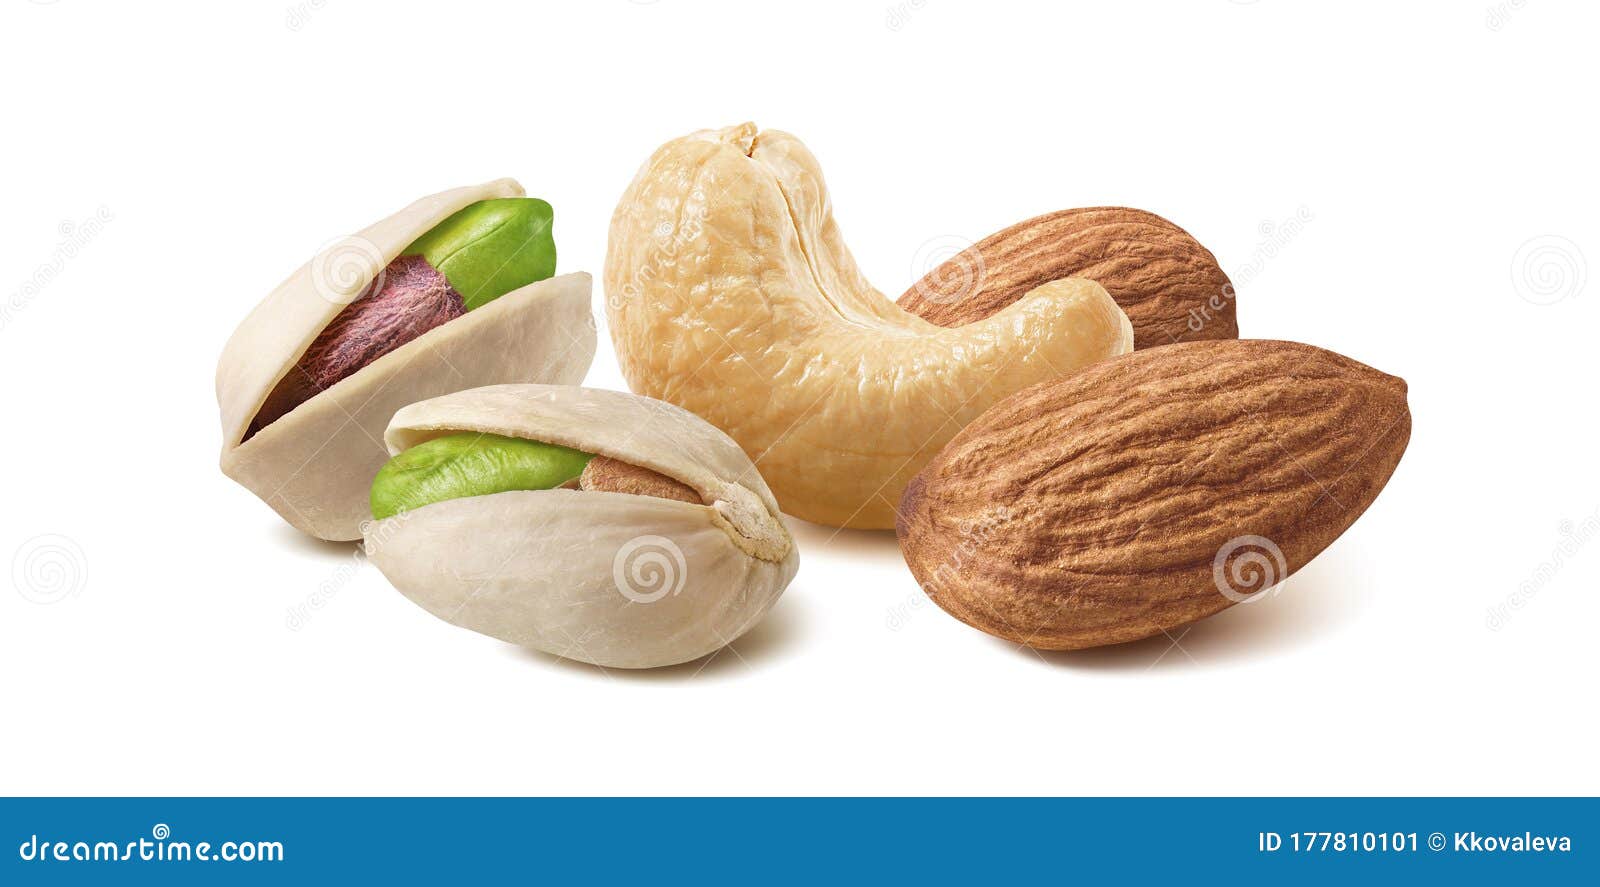 pistachios, almonds and cashew nuts mix  on white background